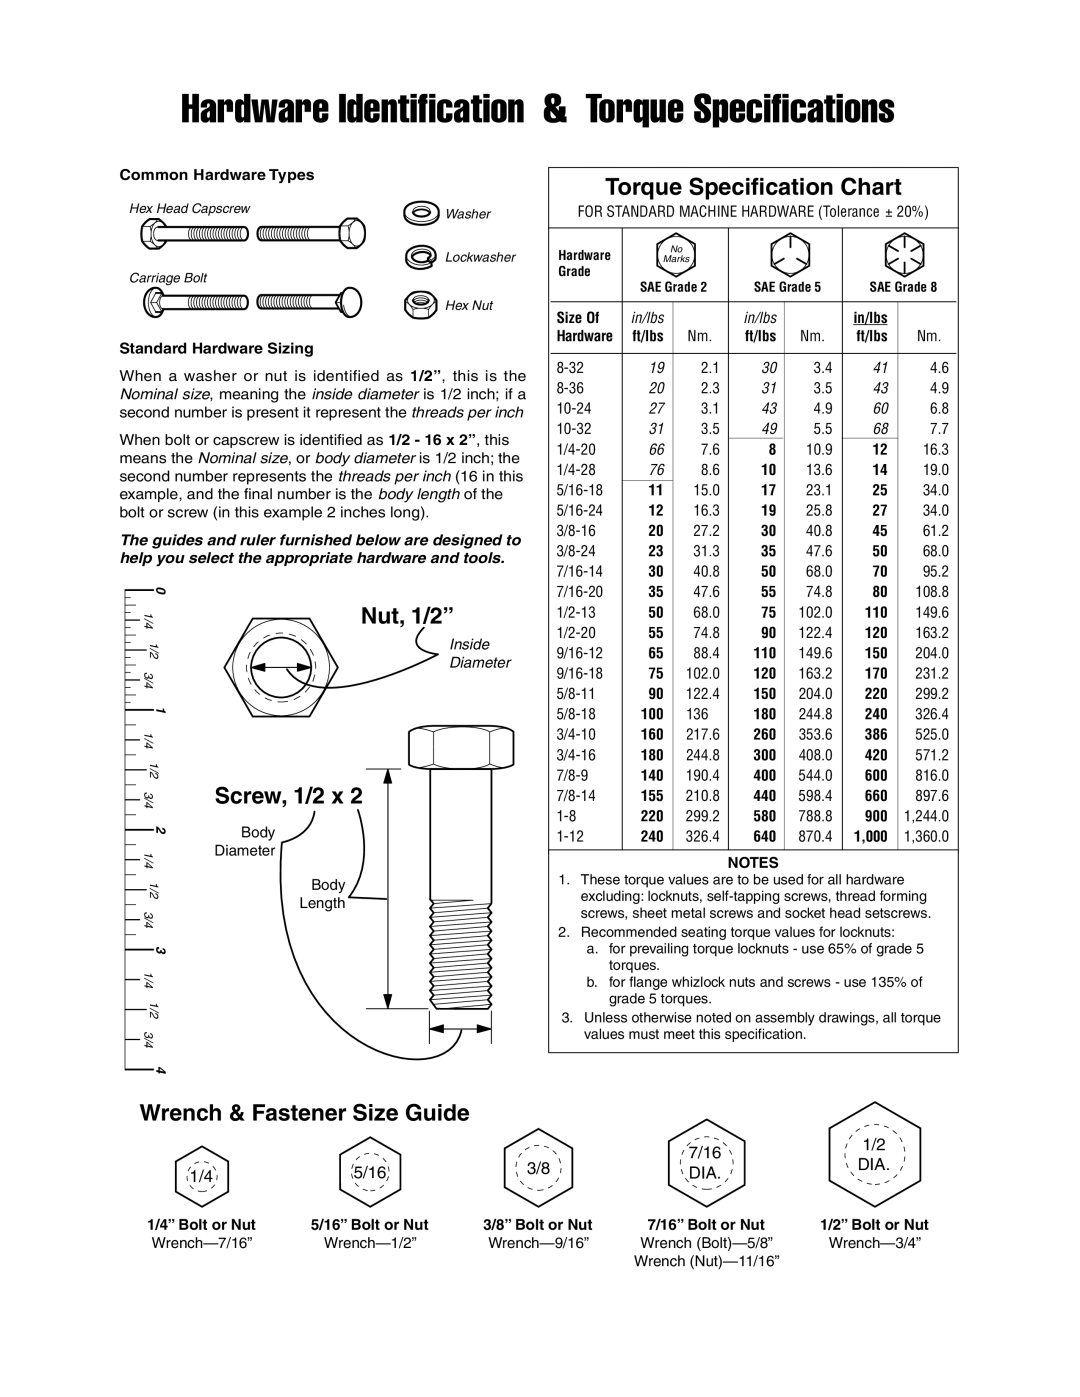 Simplicity 1694916 Wrench & Fastener Size Guide, Hardware Identification & Torque Specifications, Nut, 1/2”, Screw, 1/2 